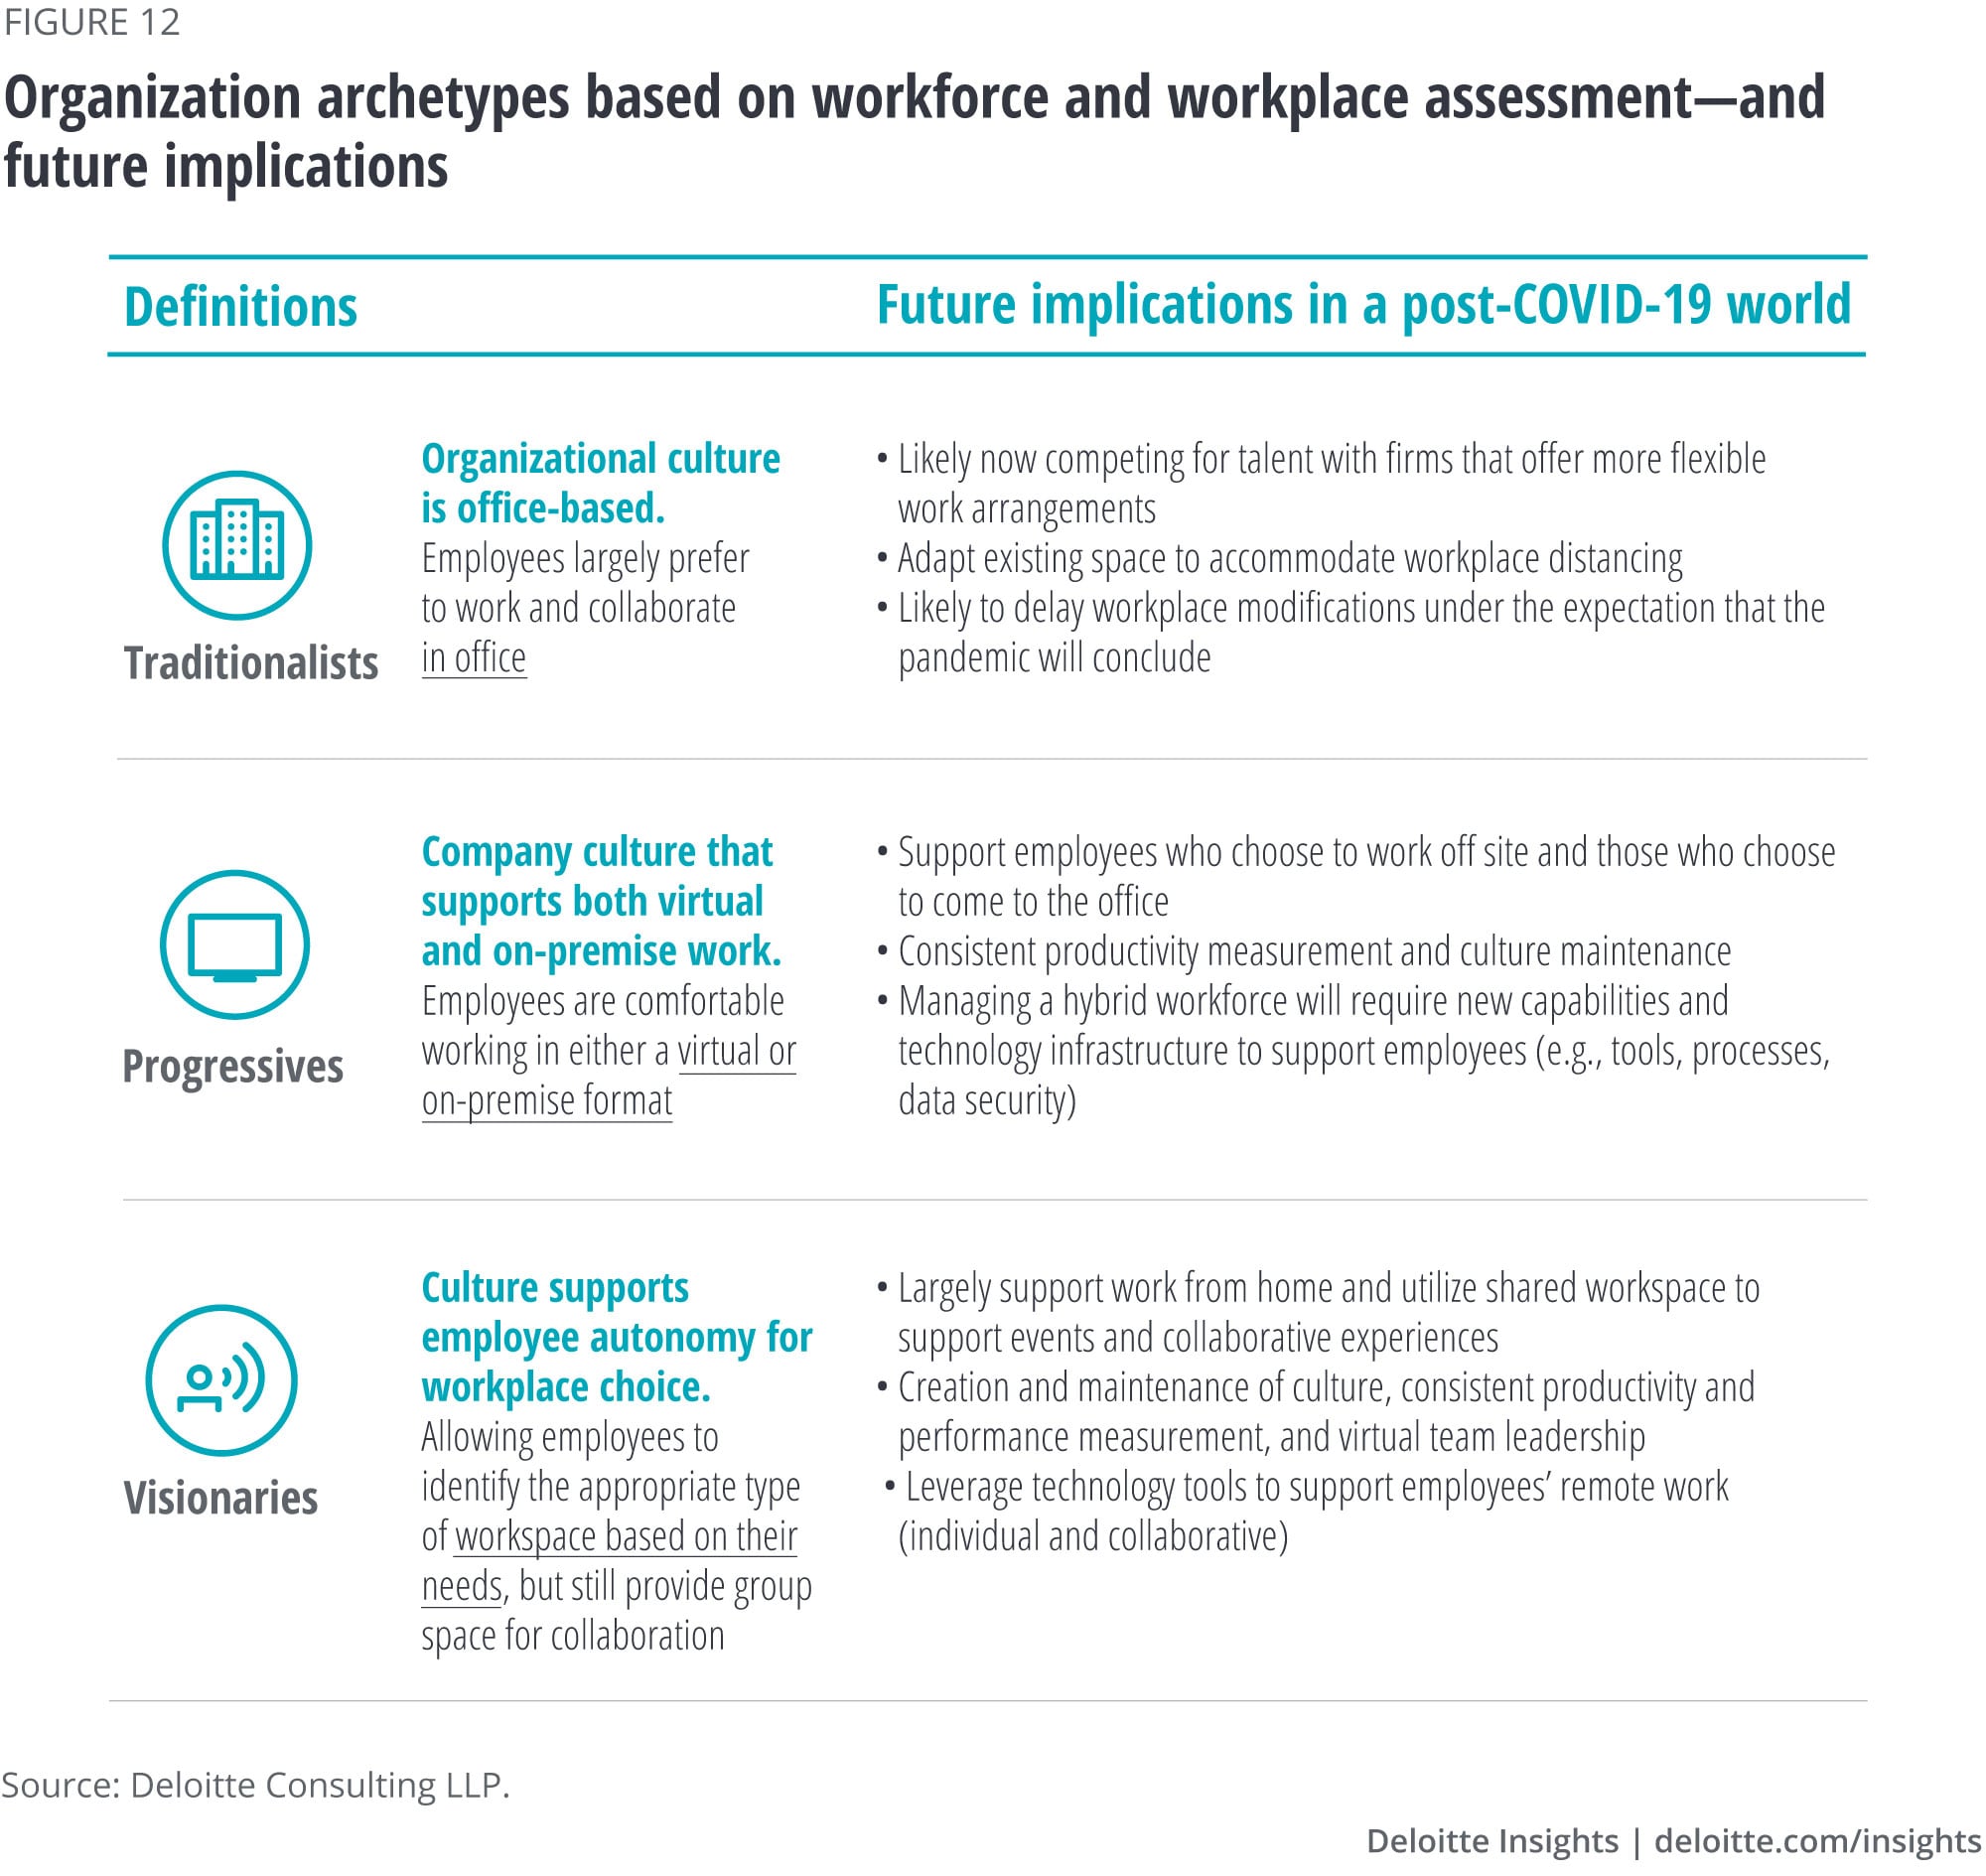 Organization archetypes based on workforce and workplace assessment, and future implications